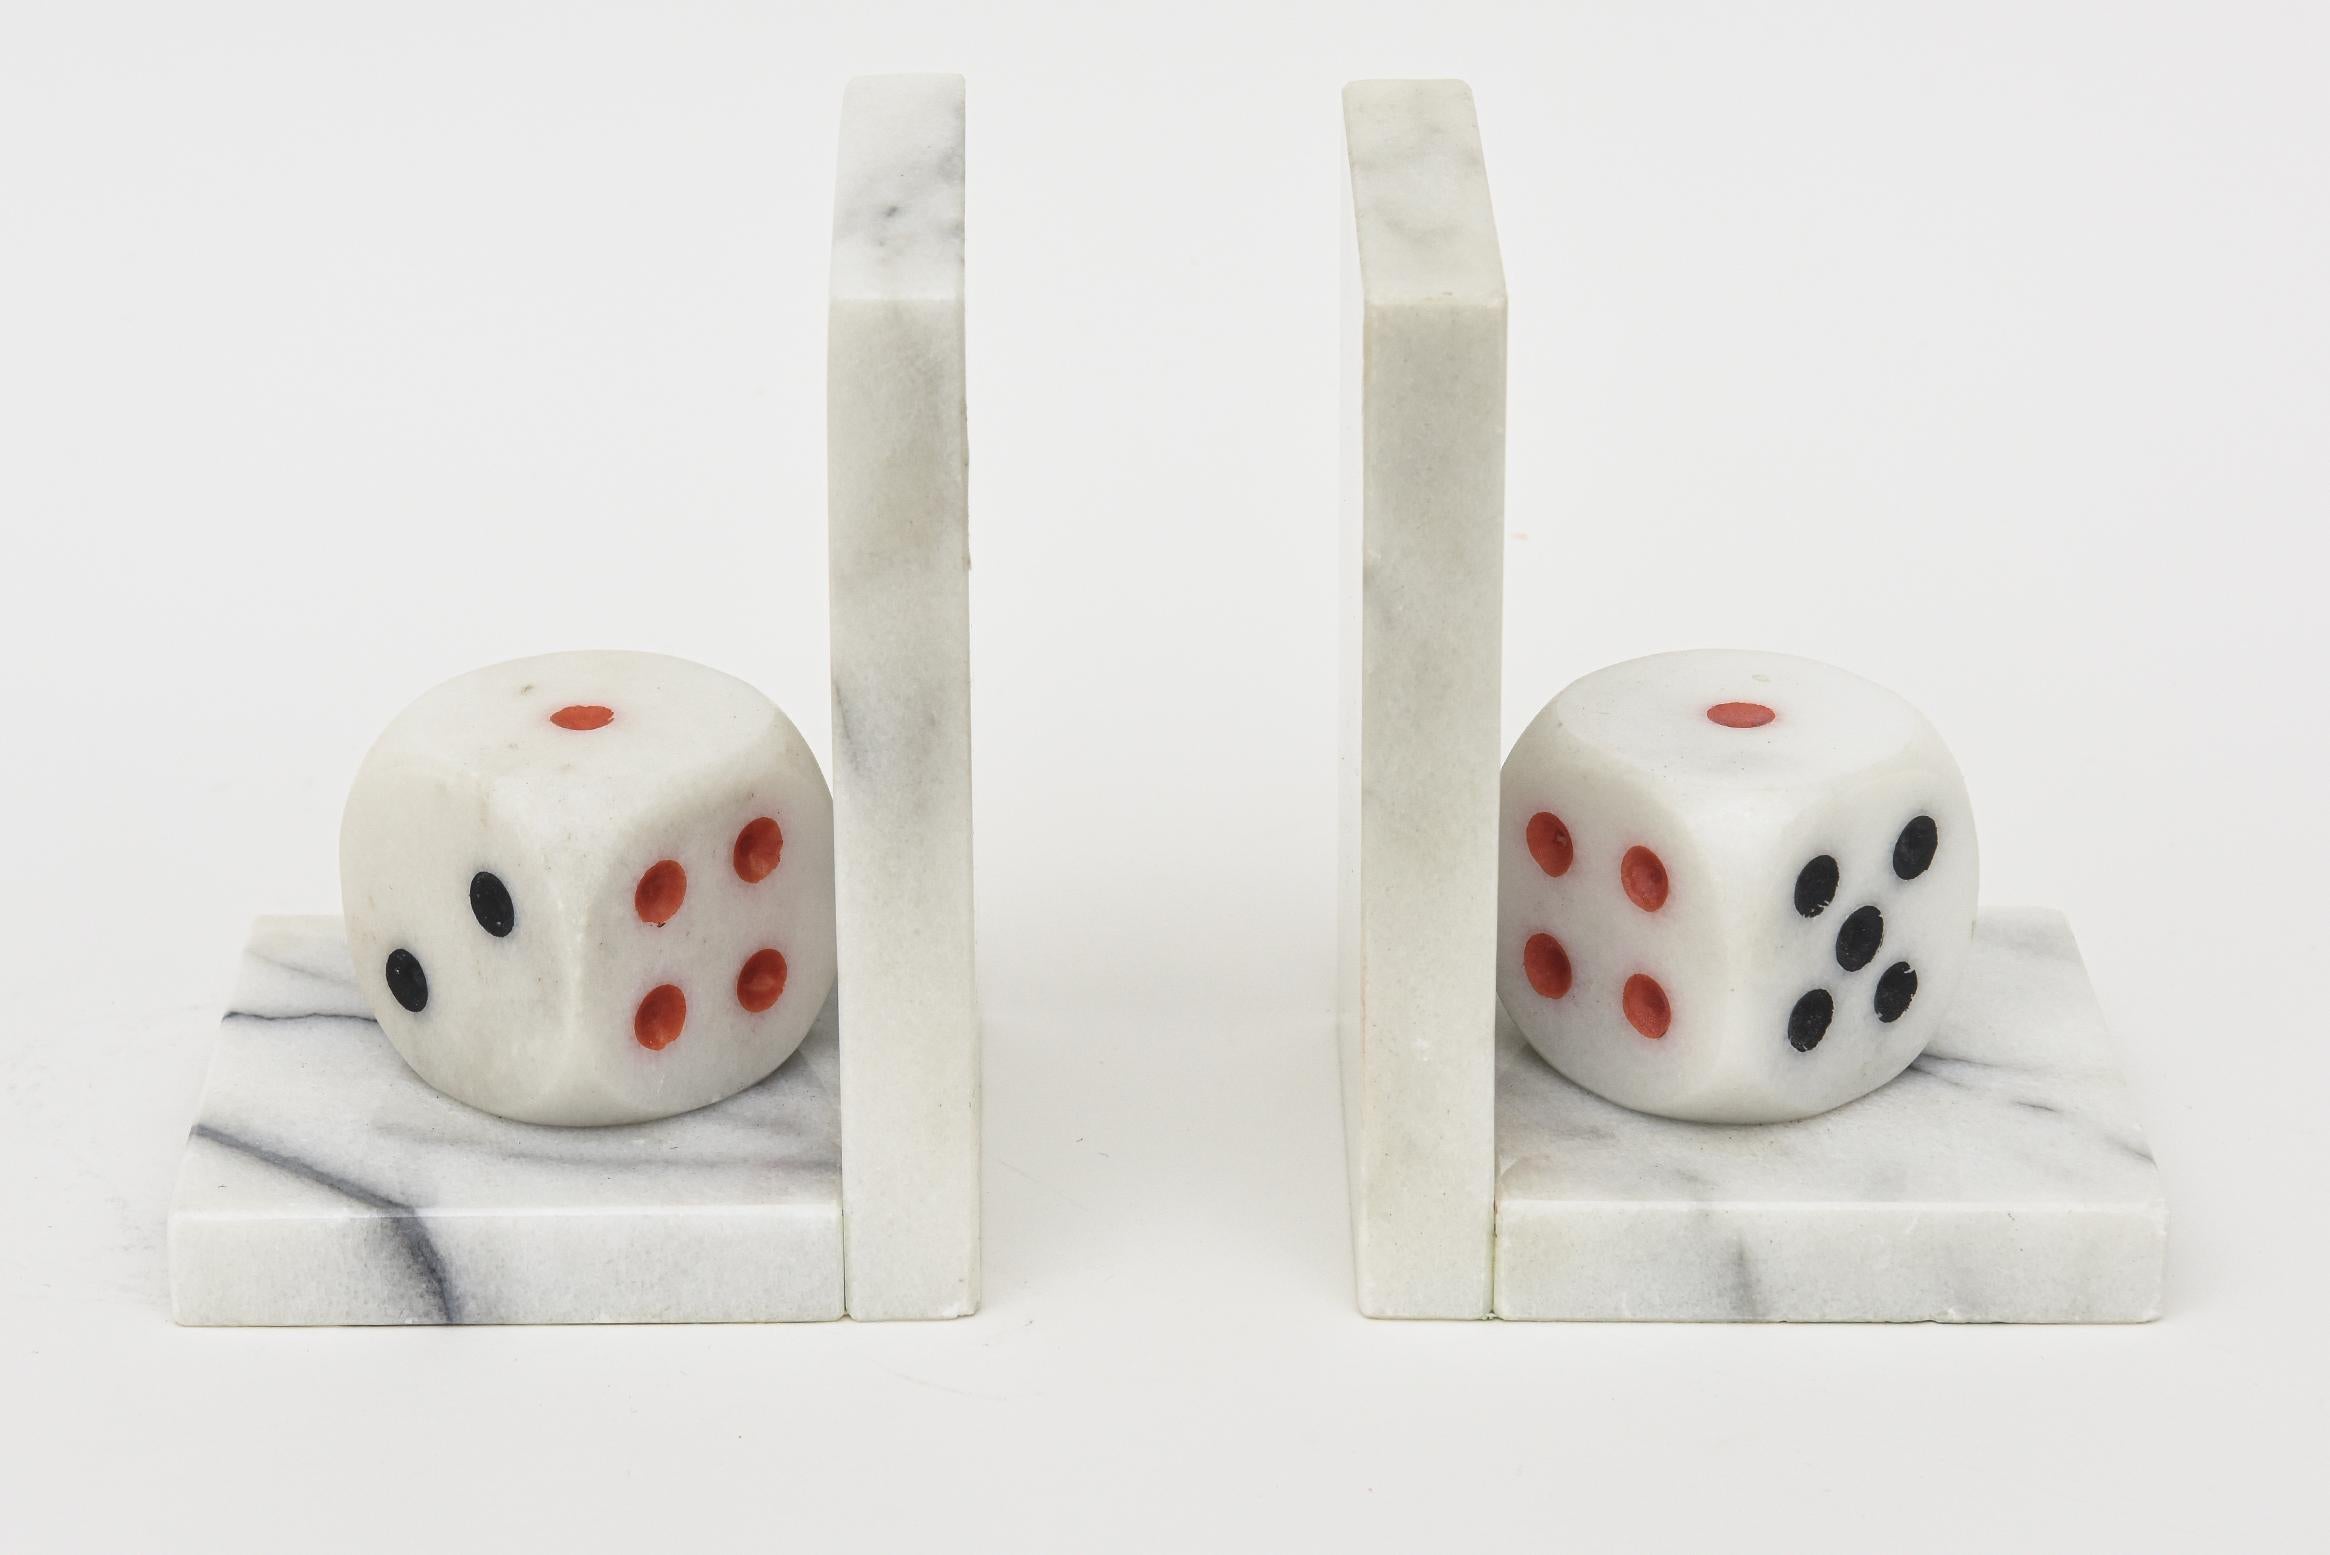 This pair of vintage unusual Italian 1960s white carrara marble bookends have large dice propped as the focal point with red and black resin dots. They have been professionally polished to the best they can be now. The original worn felt is still